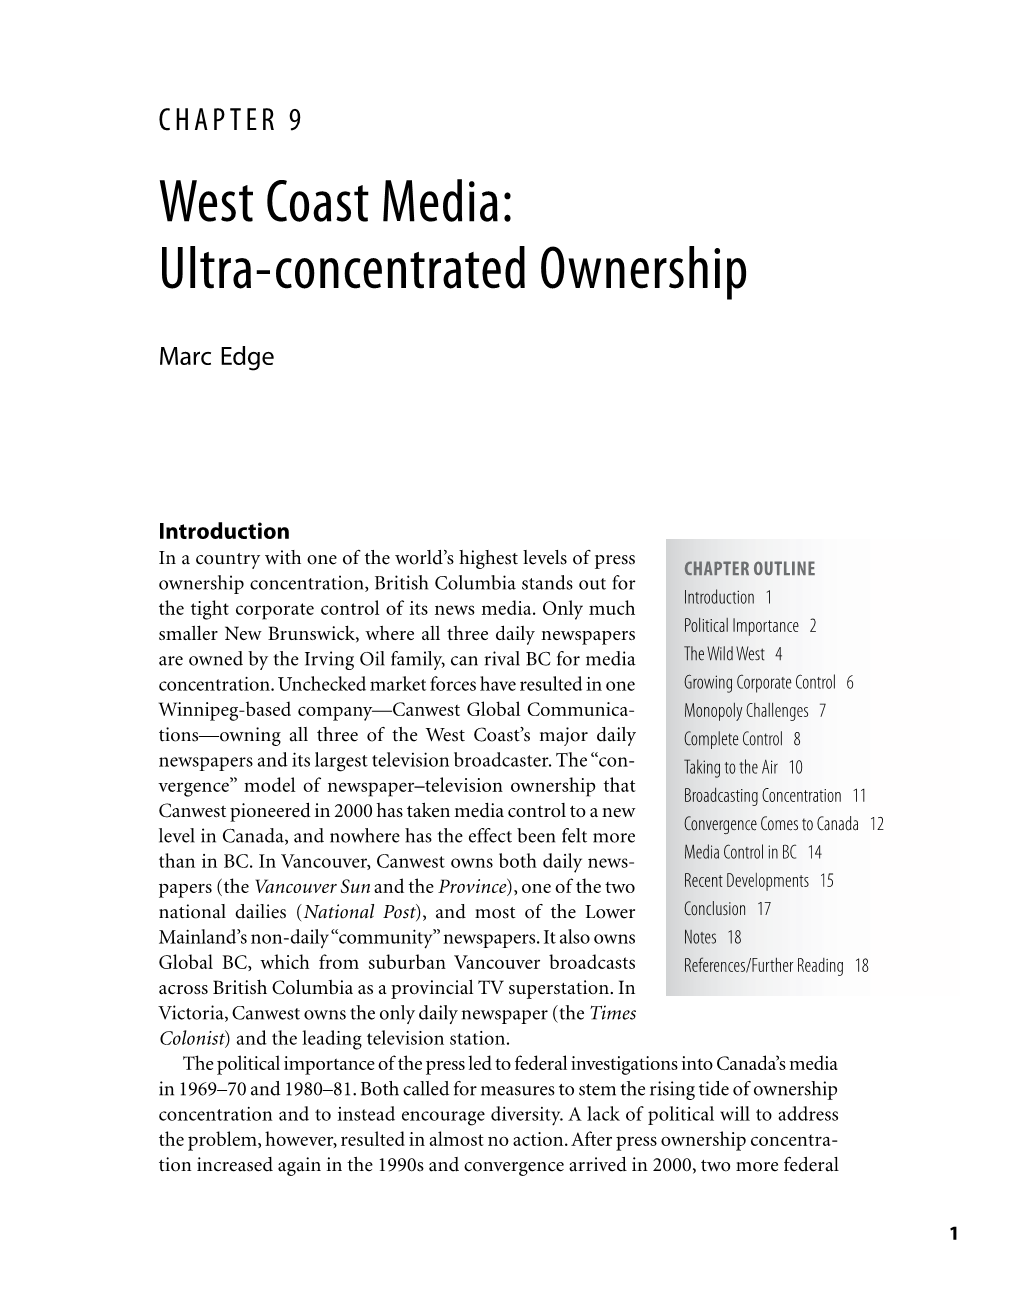 West Coast Media: Ultra-Concentrated Ownership